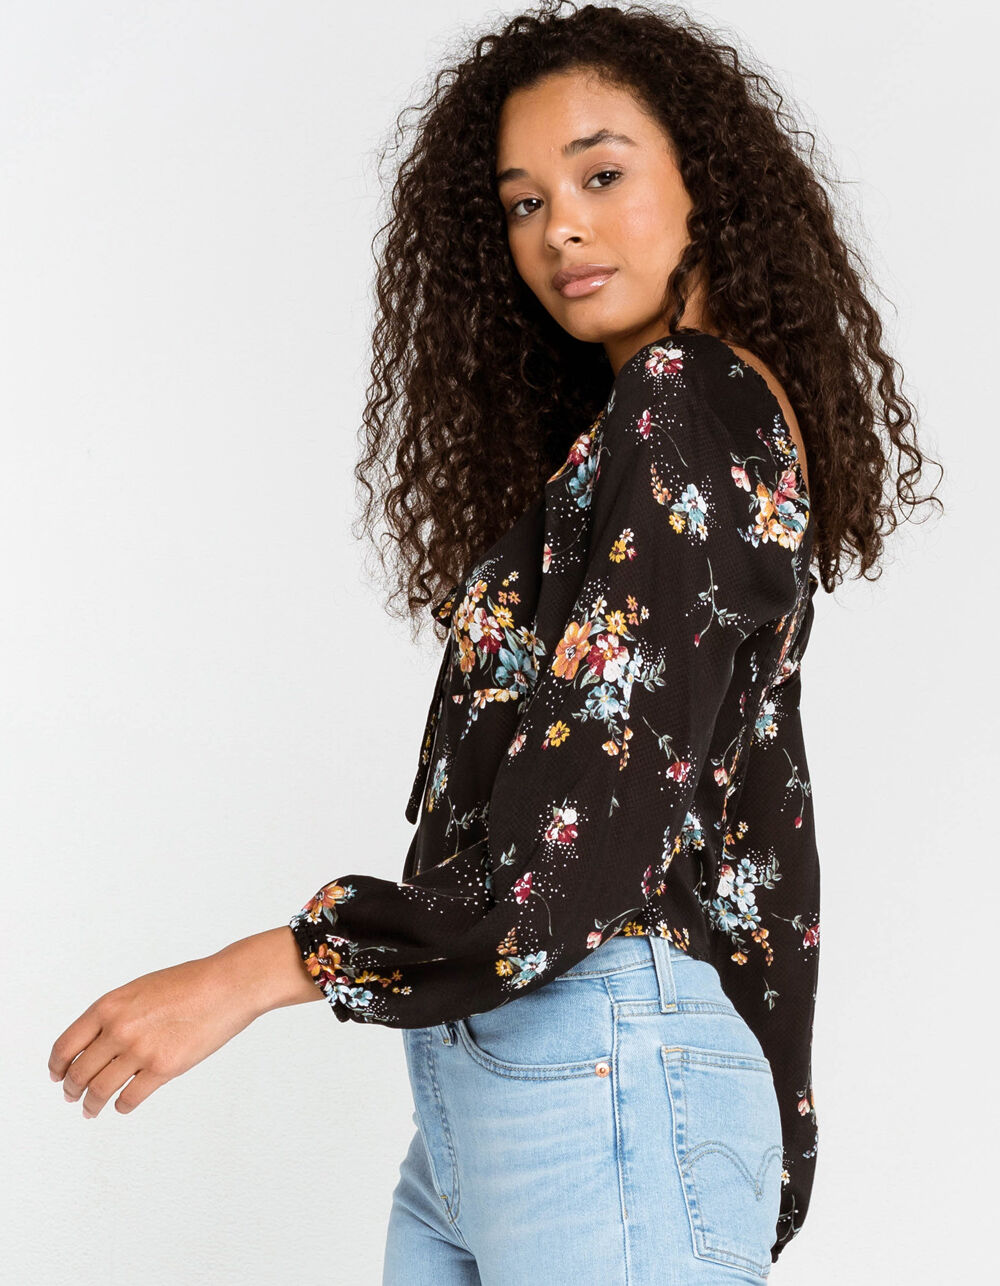 WEST OF MELROSE Growing On Me Tie Front Womens Top - BLACK COMBO | Tillys